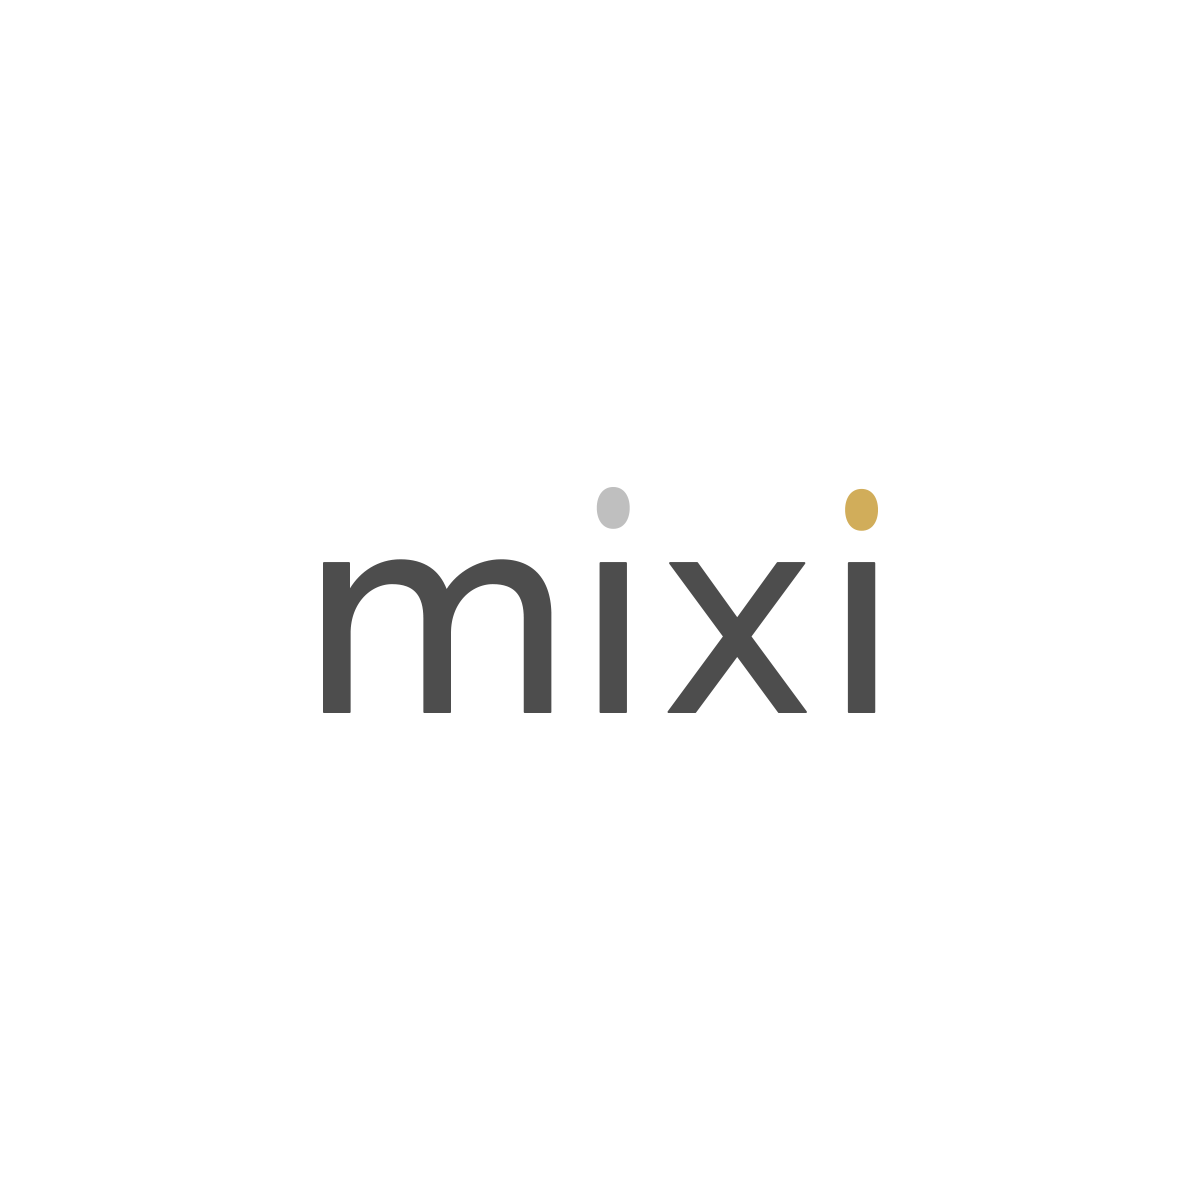 View ソーシャル・ネットワーキング サービス [mixi(ミクシィ)] outages and uptime